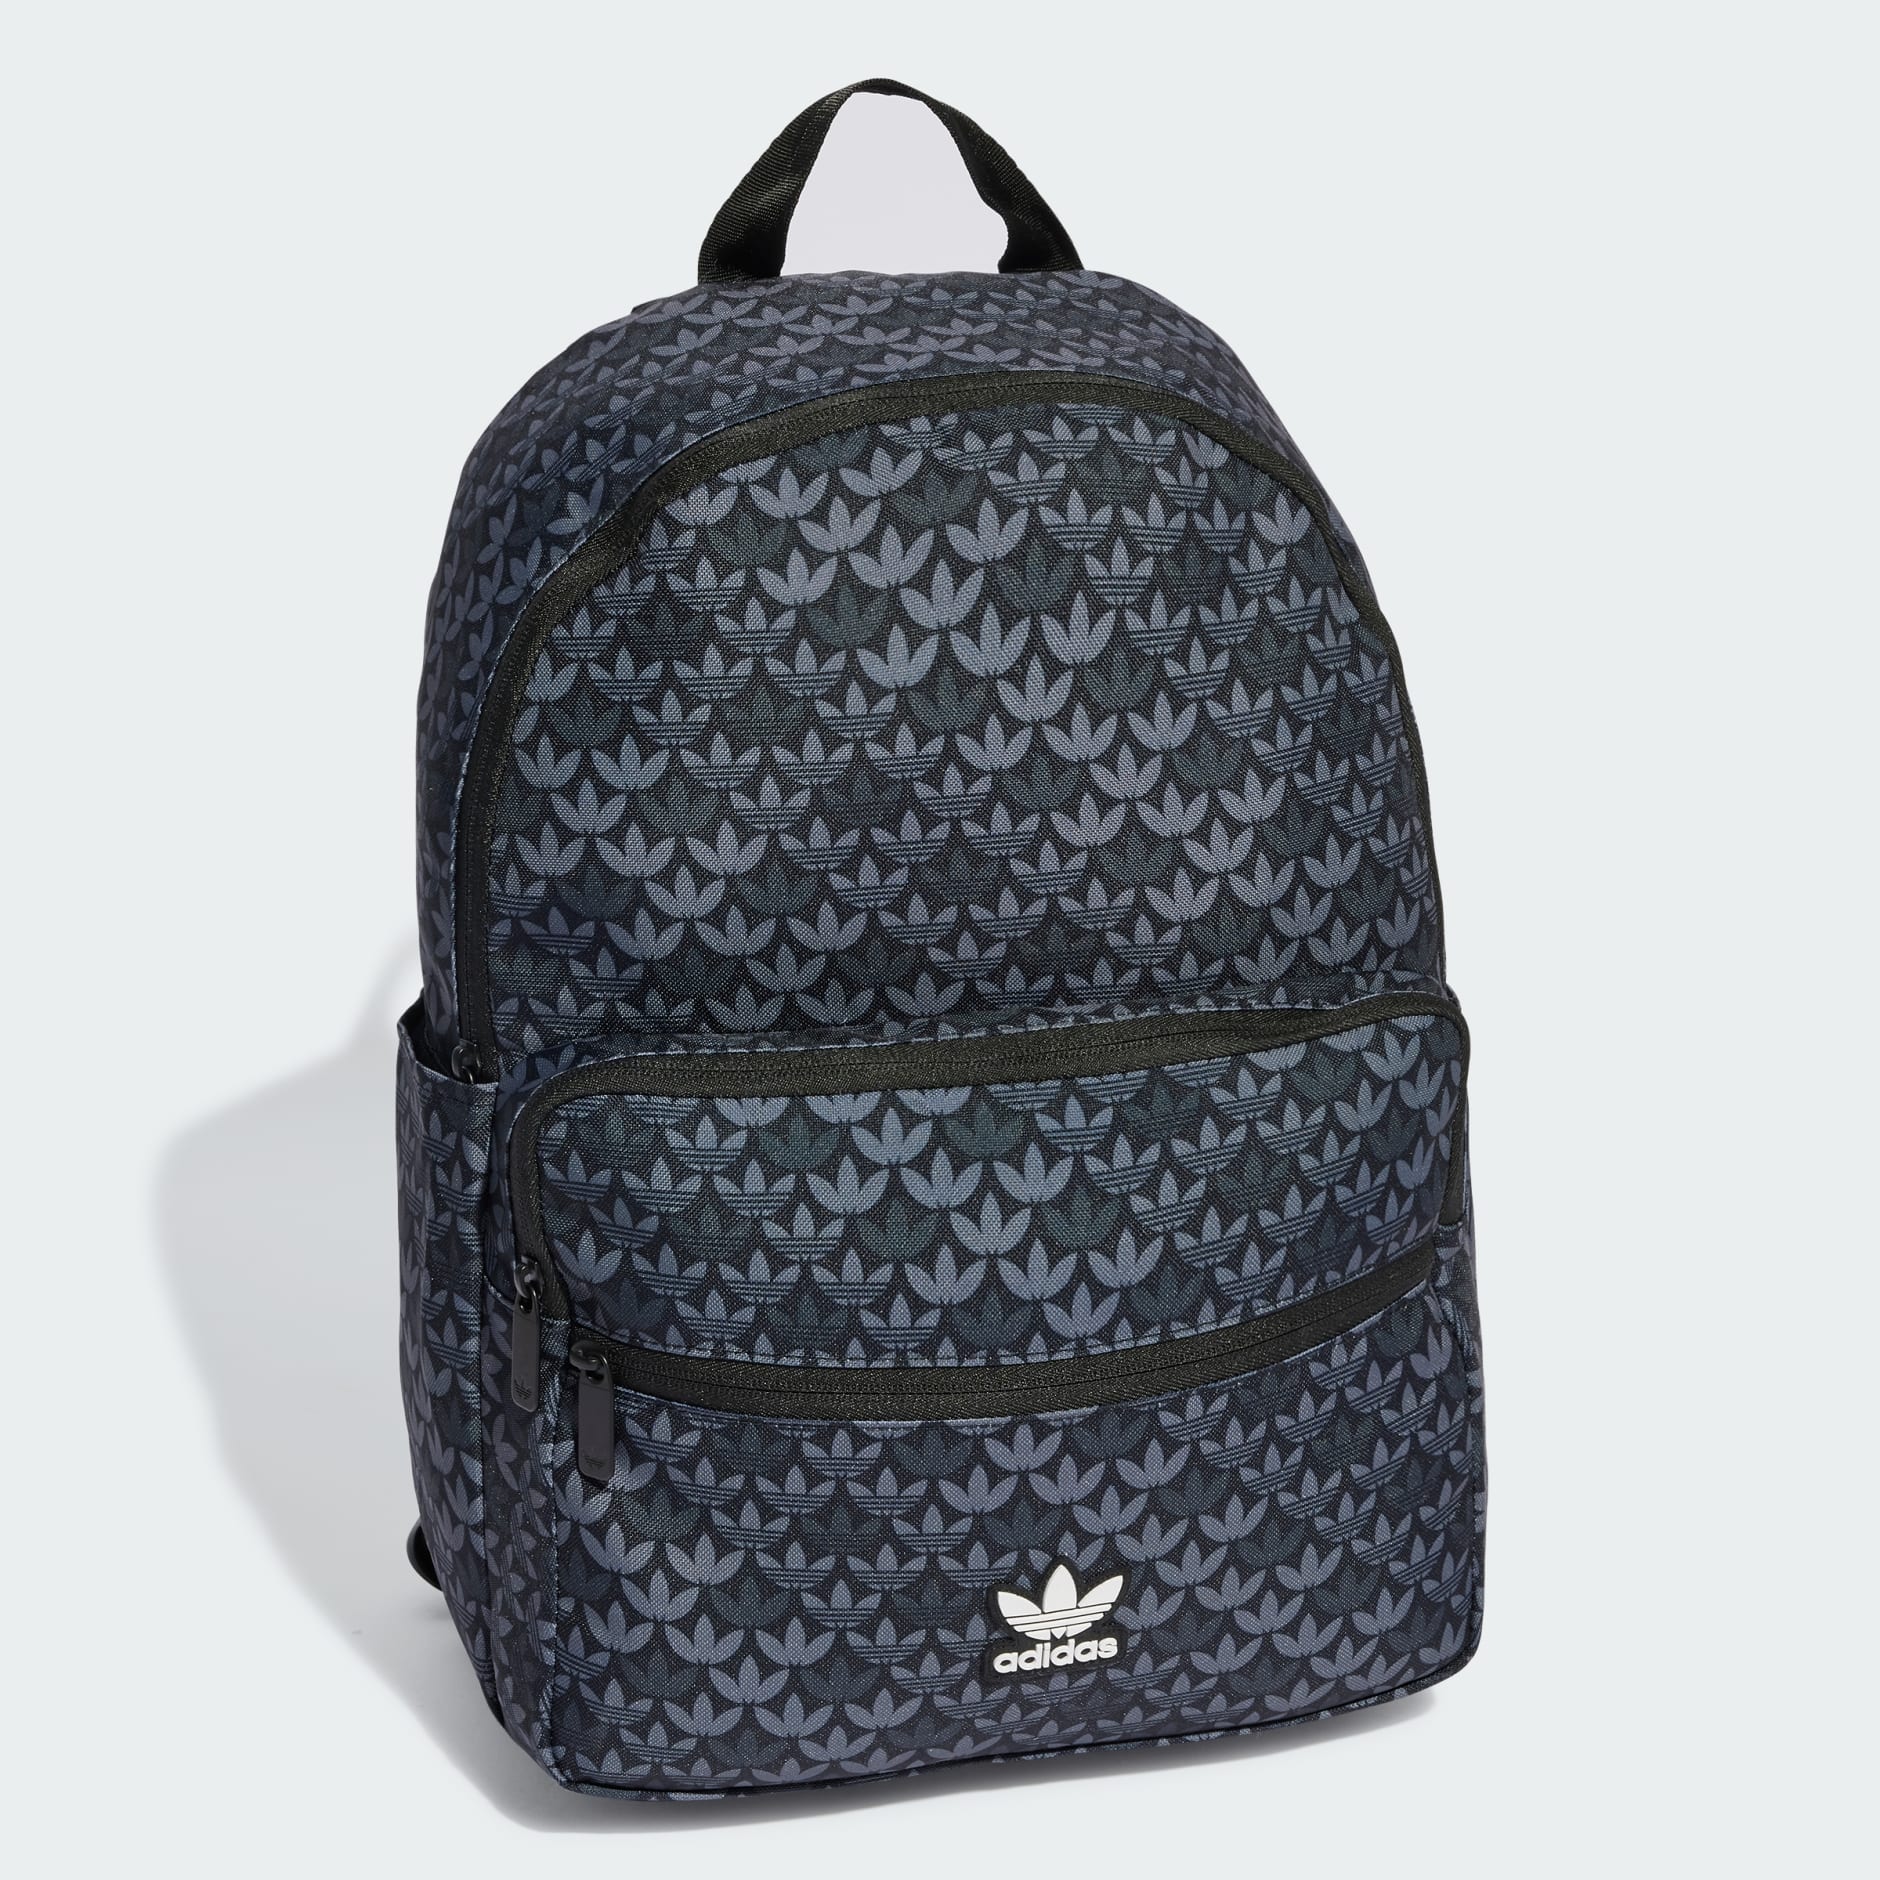 adidas Men's Bags & Backpacks | adidas South Africa